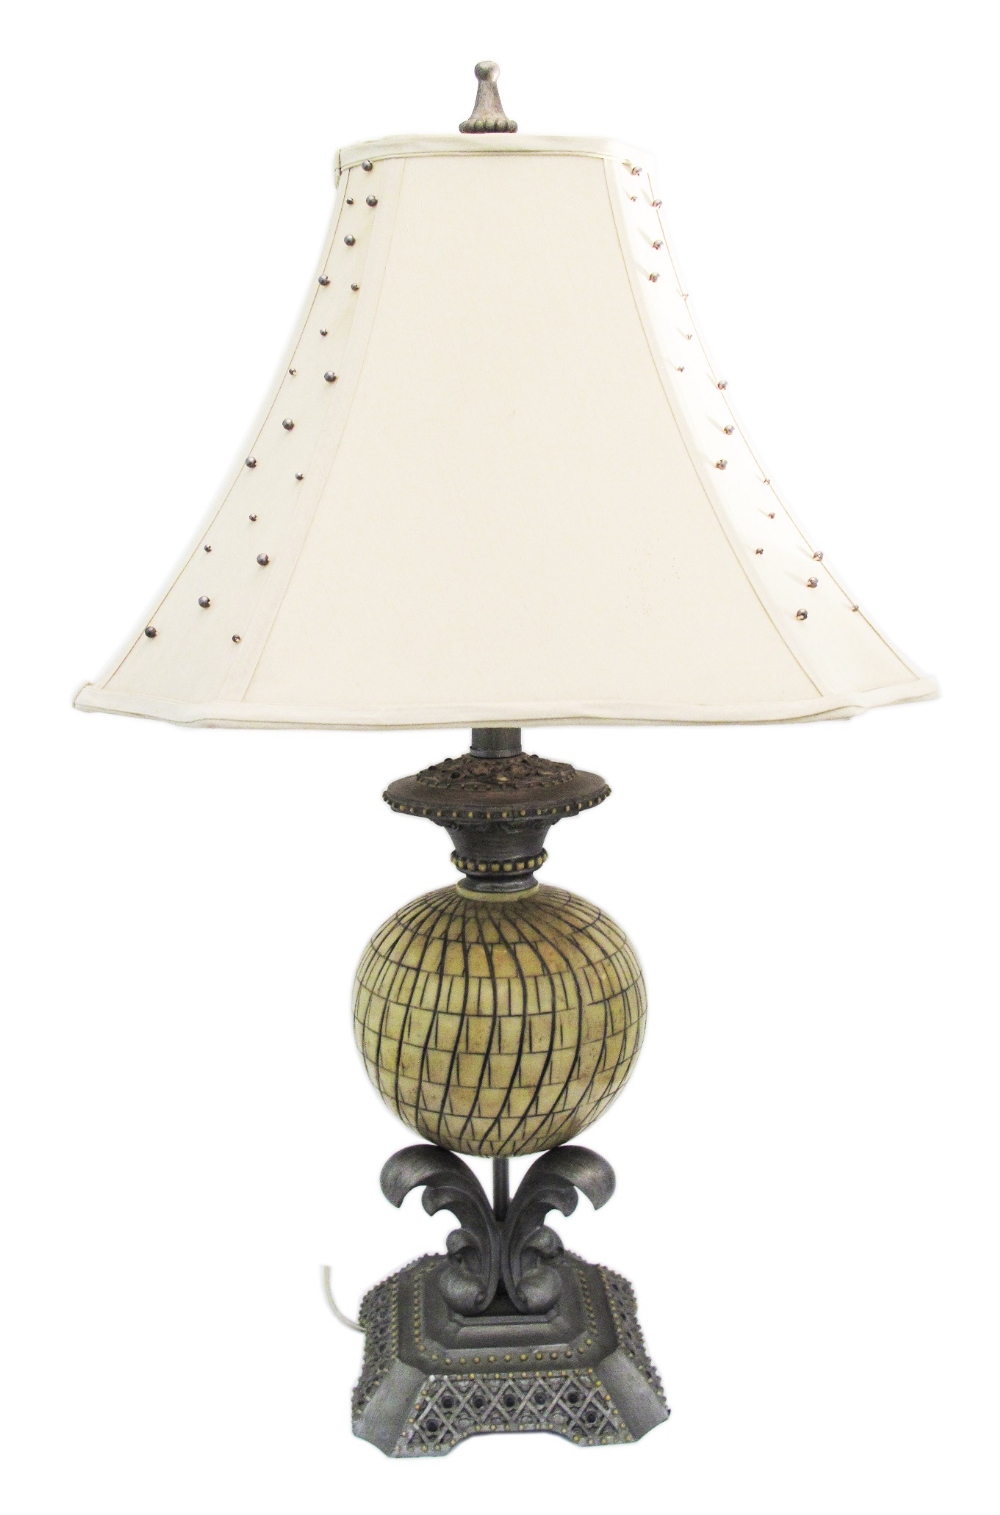 A table lamp with a globular ivorine base and cream shade. Modern. H85cm.
No Reserve.